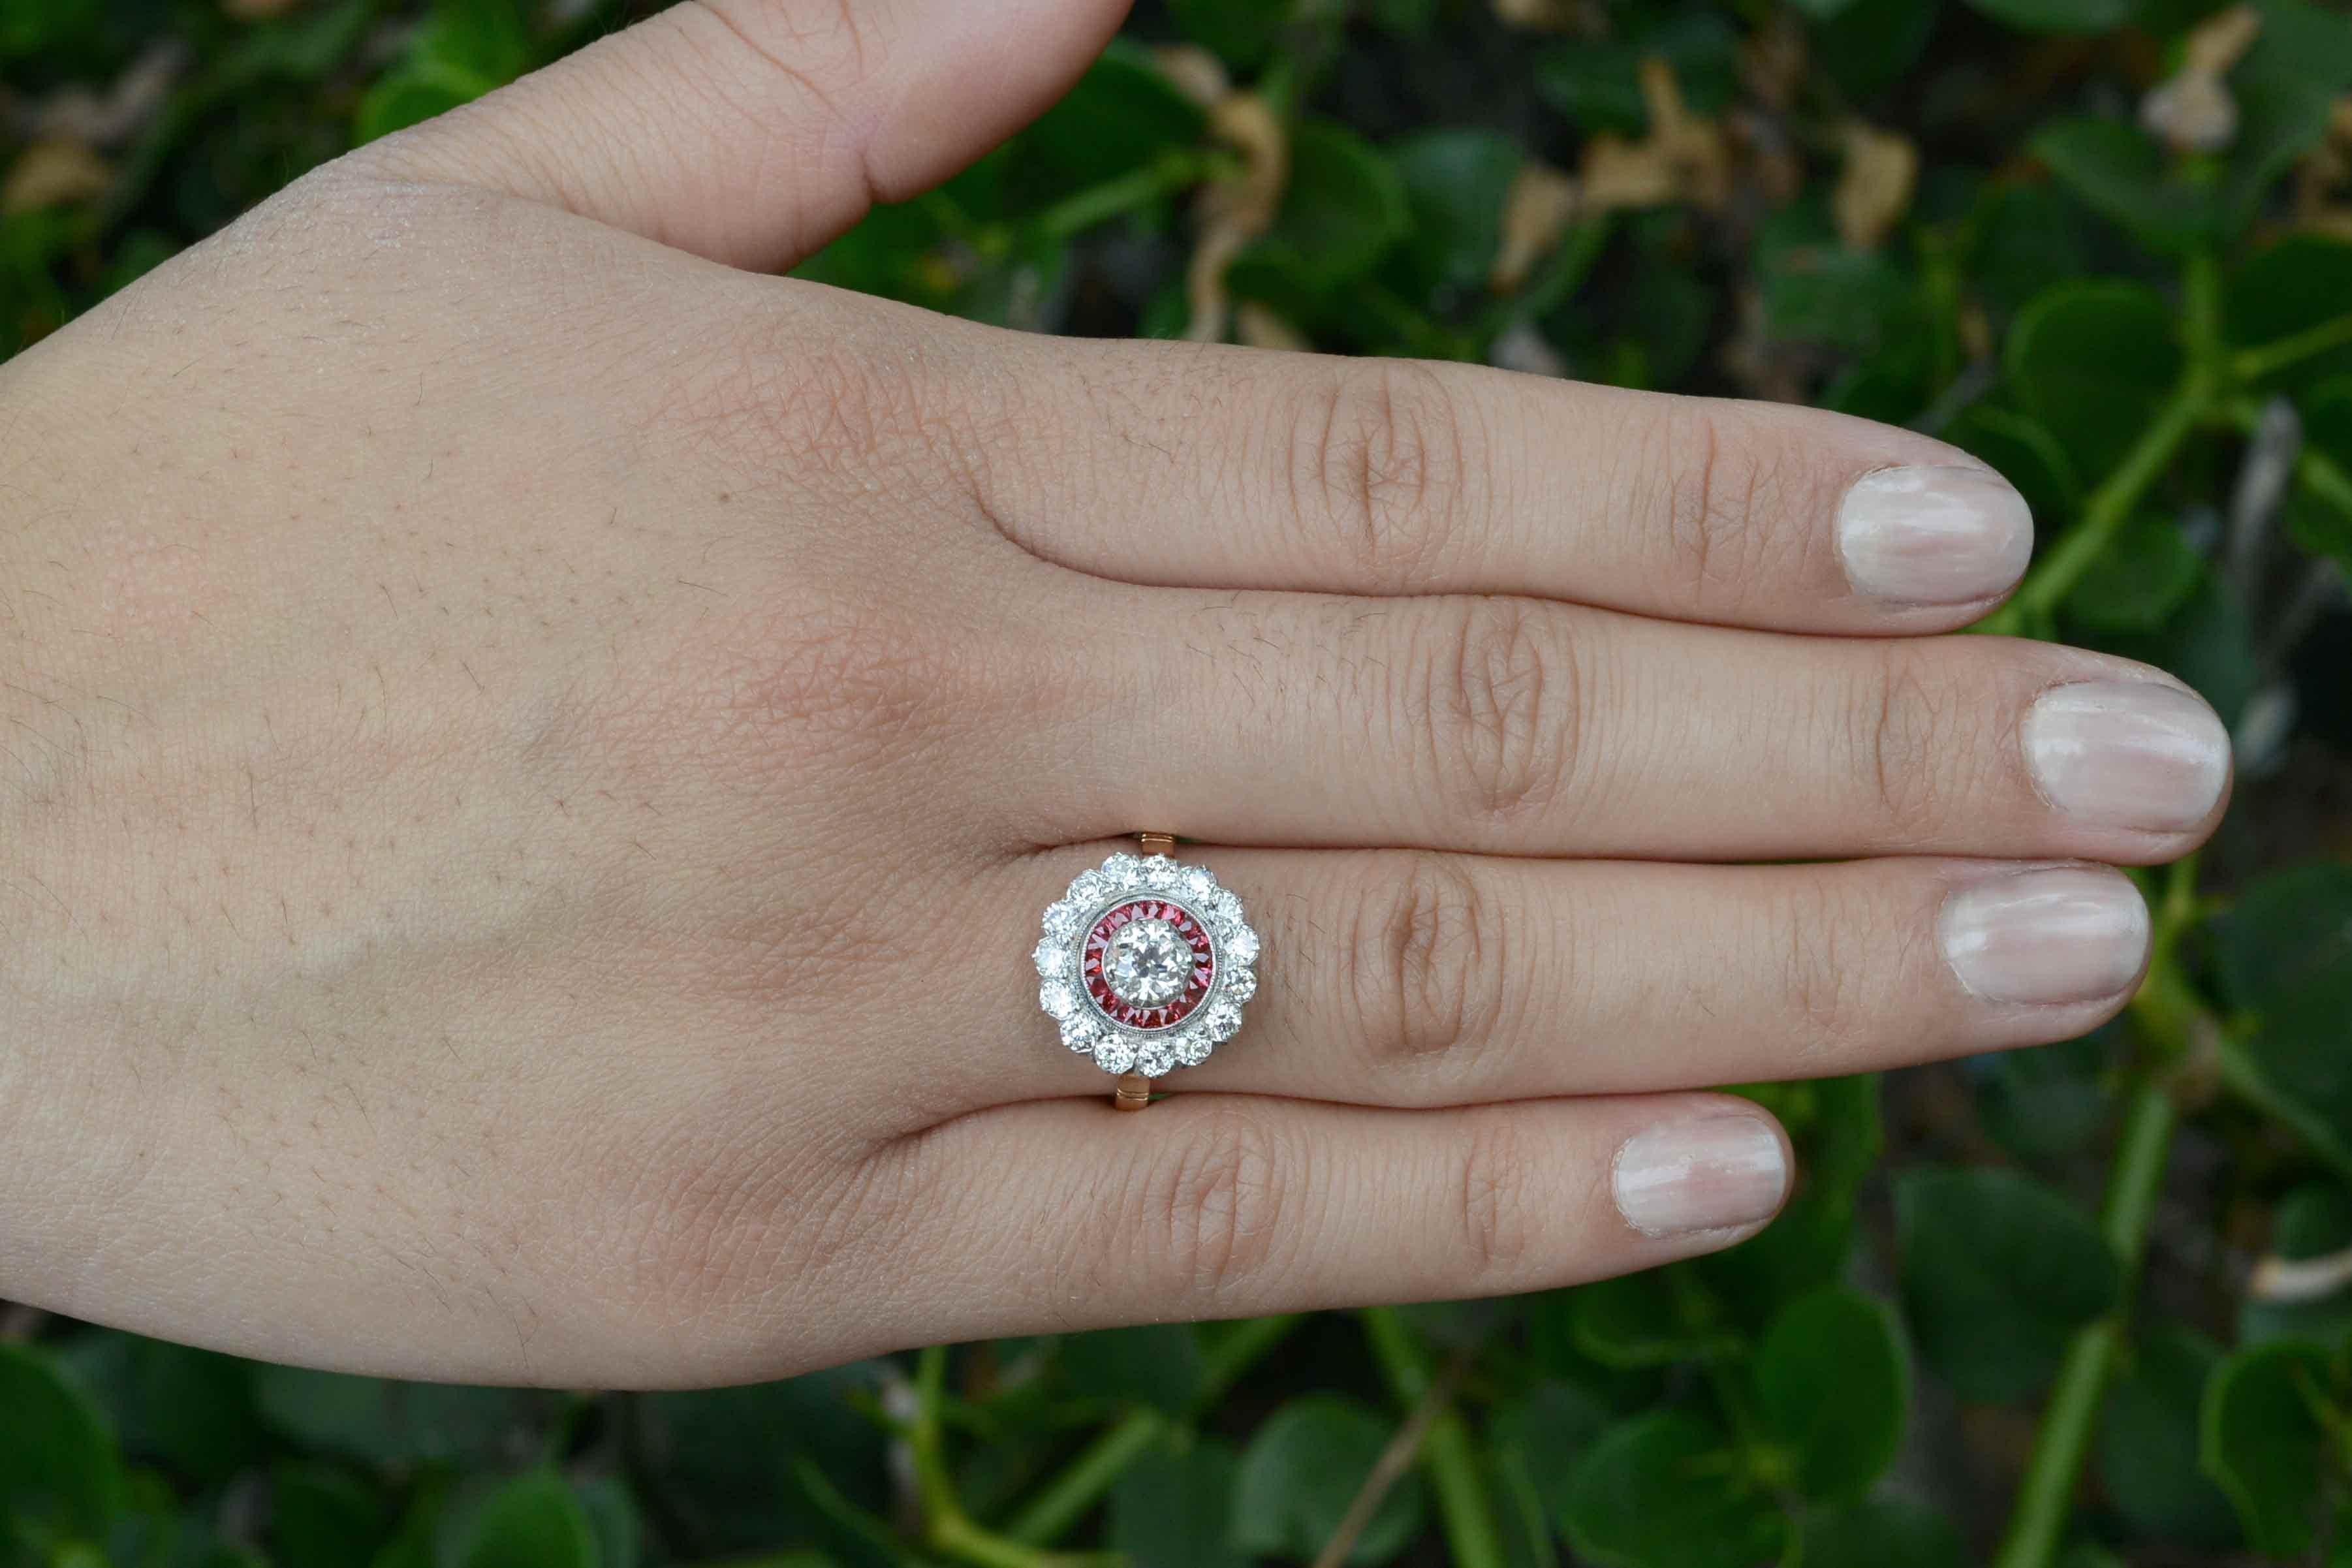 Reserved for a customer, do not purchase.

Centering on a bright and fiery old European cut 1/2 carat diamond, the alluring ruby flower cluster is so feminine. The sought after halo design is accented with French cut calibre' natural rubies  of a